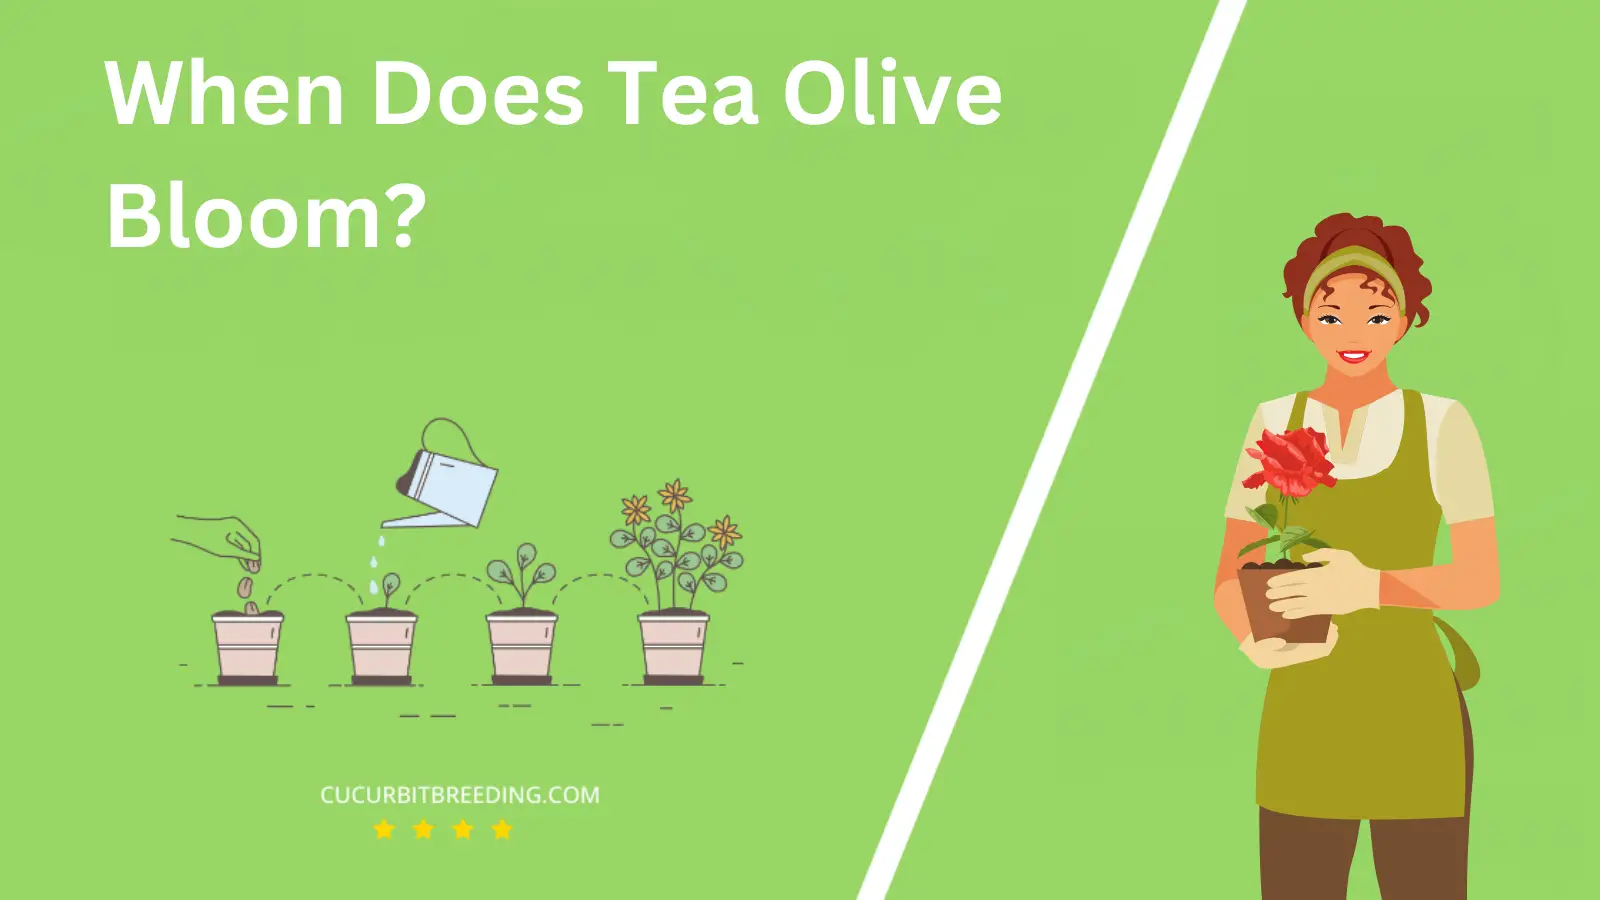 When Does Tea Olive Bloom?